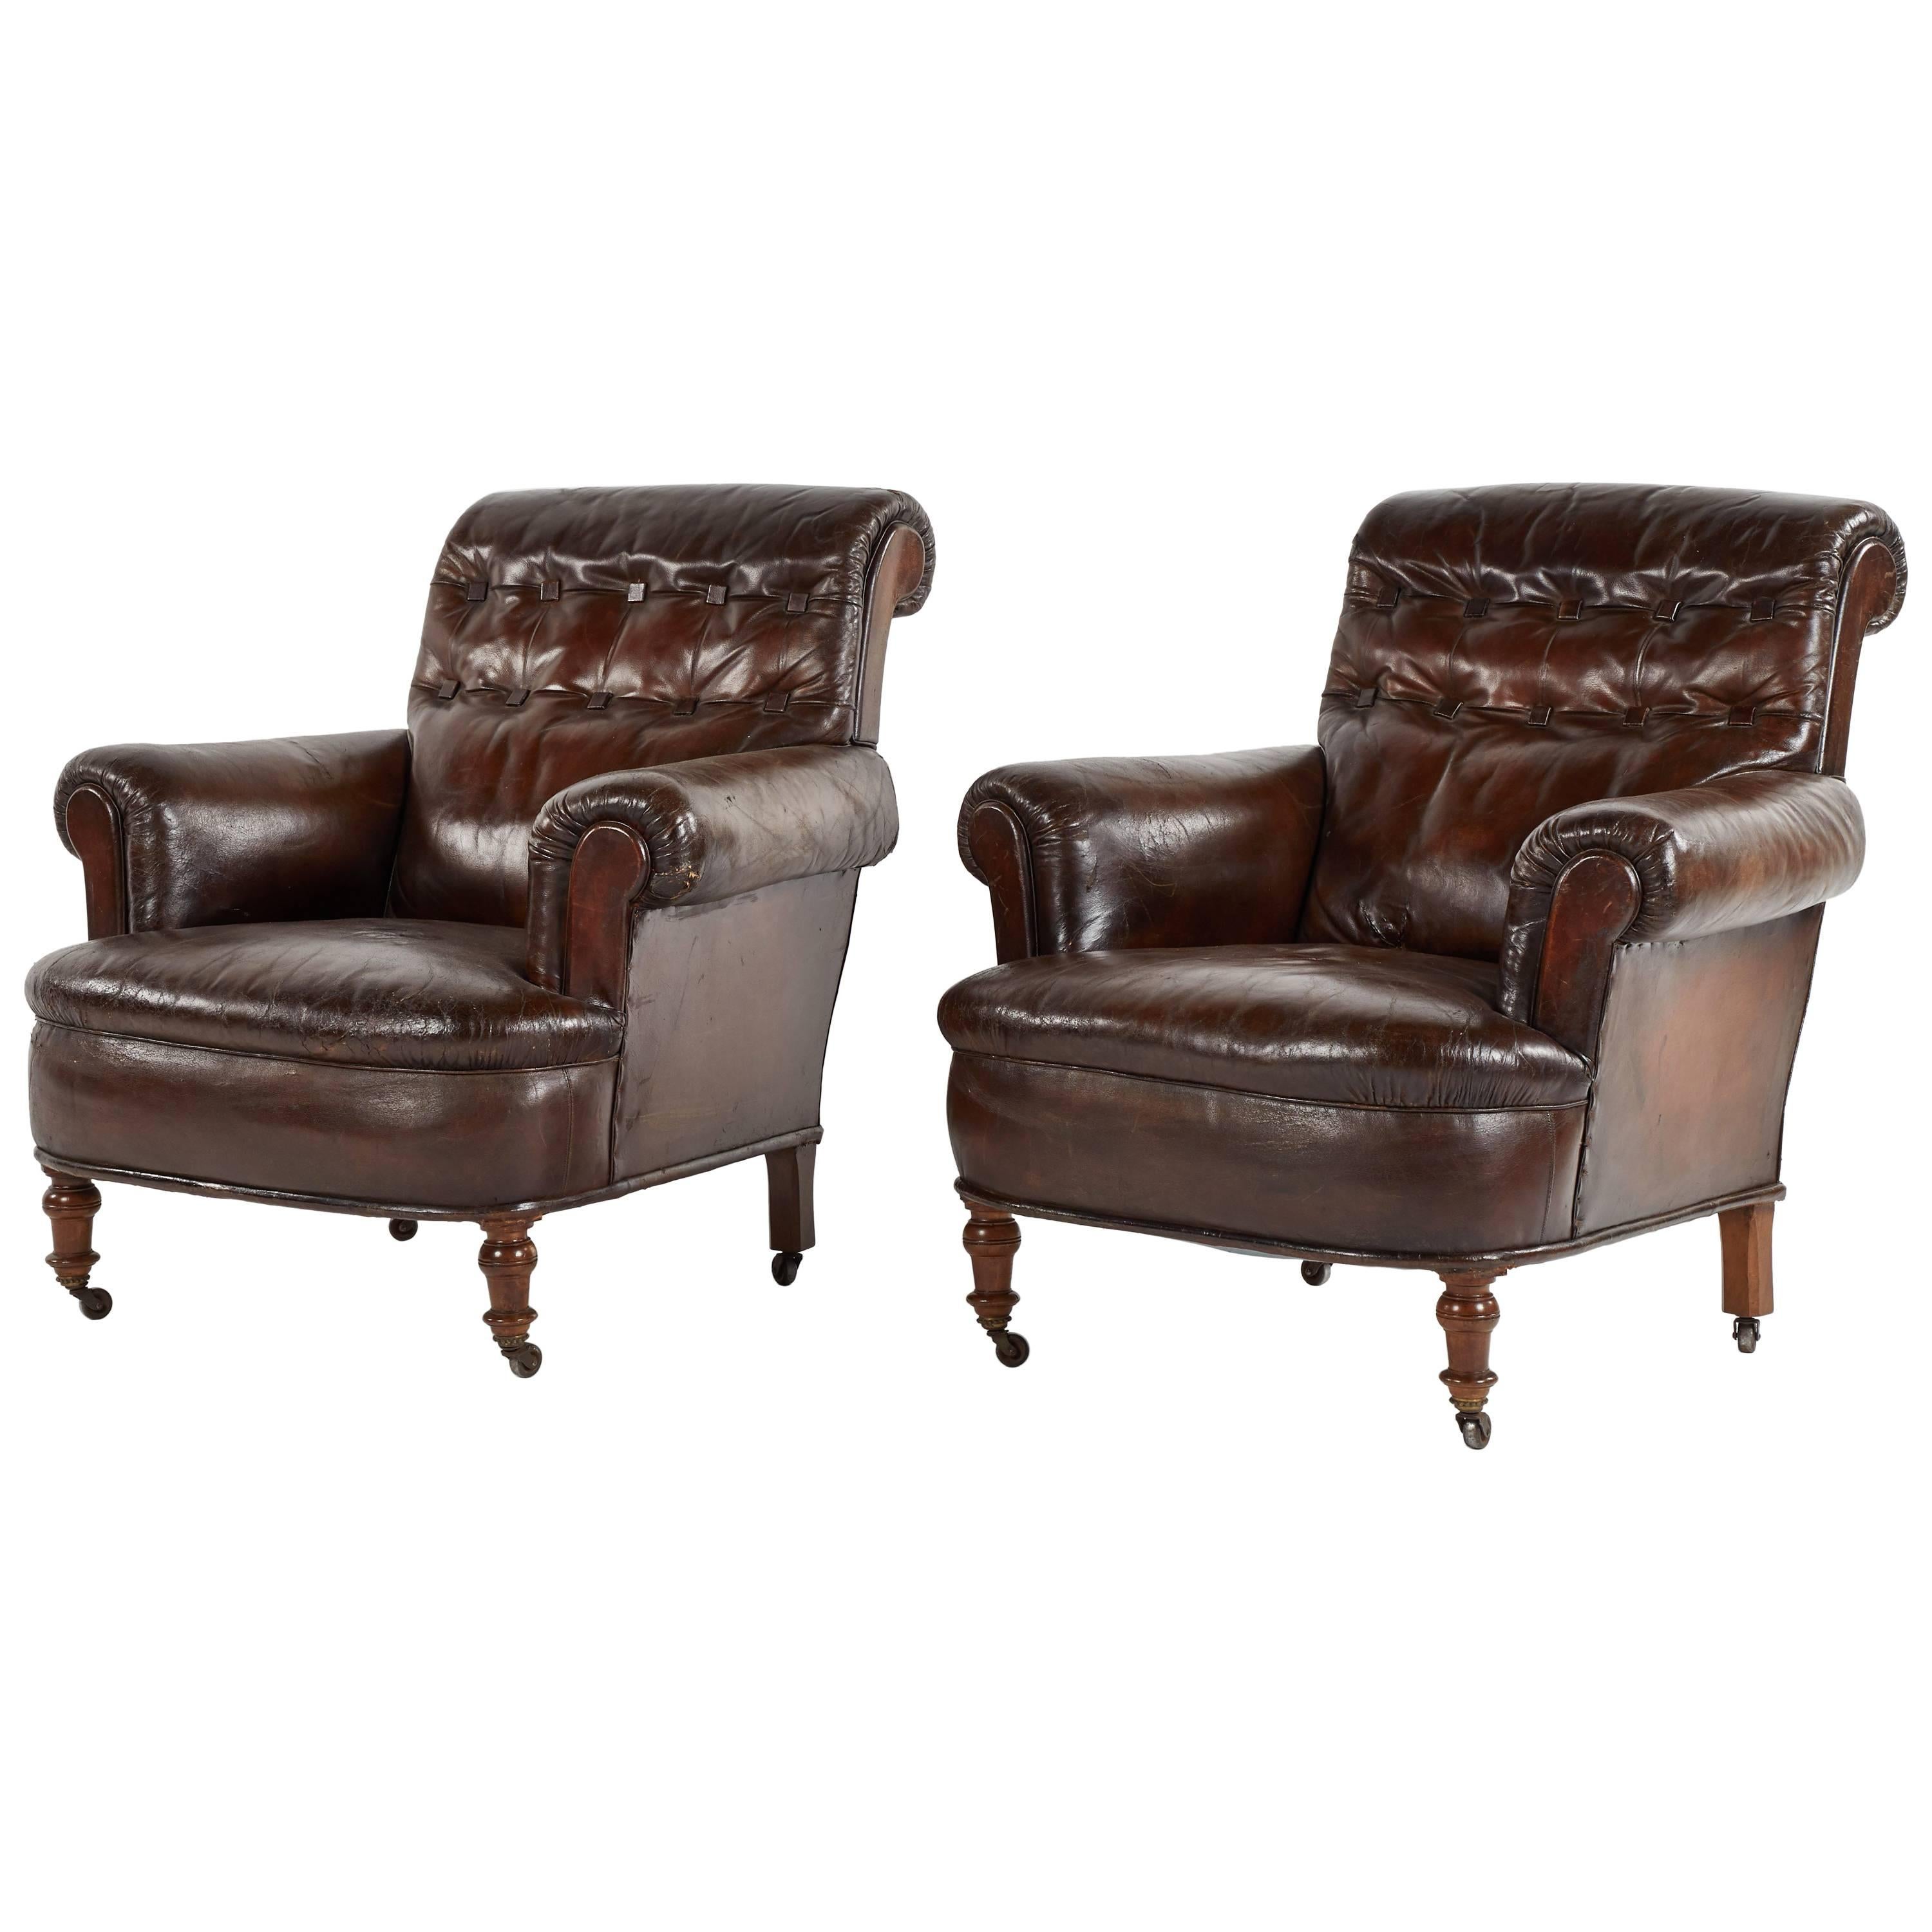 1880s French Pair of Leather Tufted Chairs